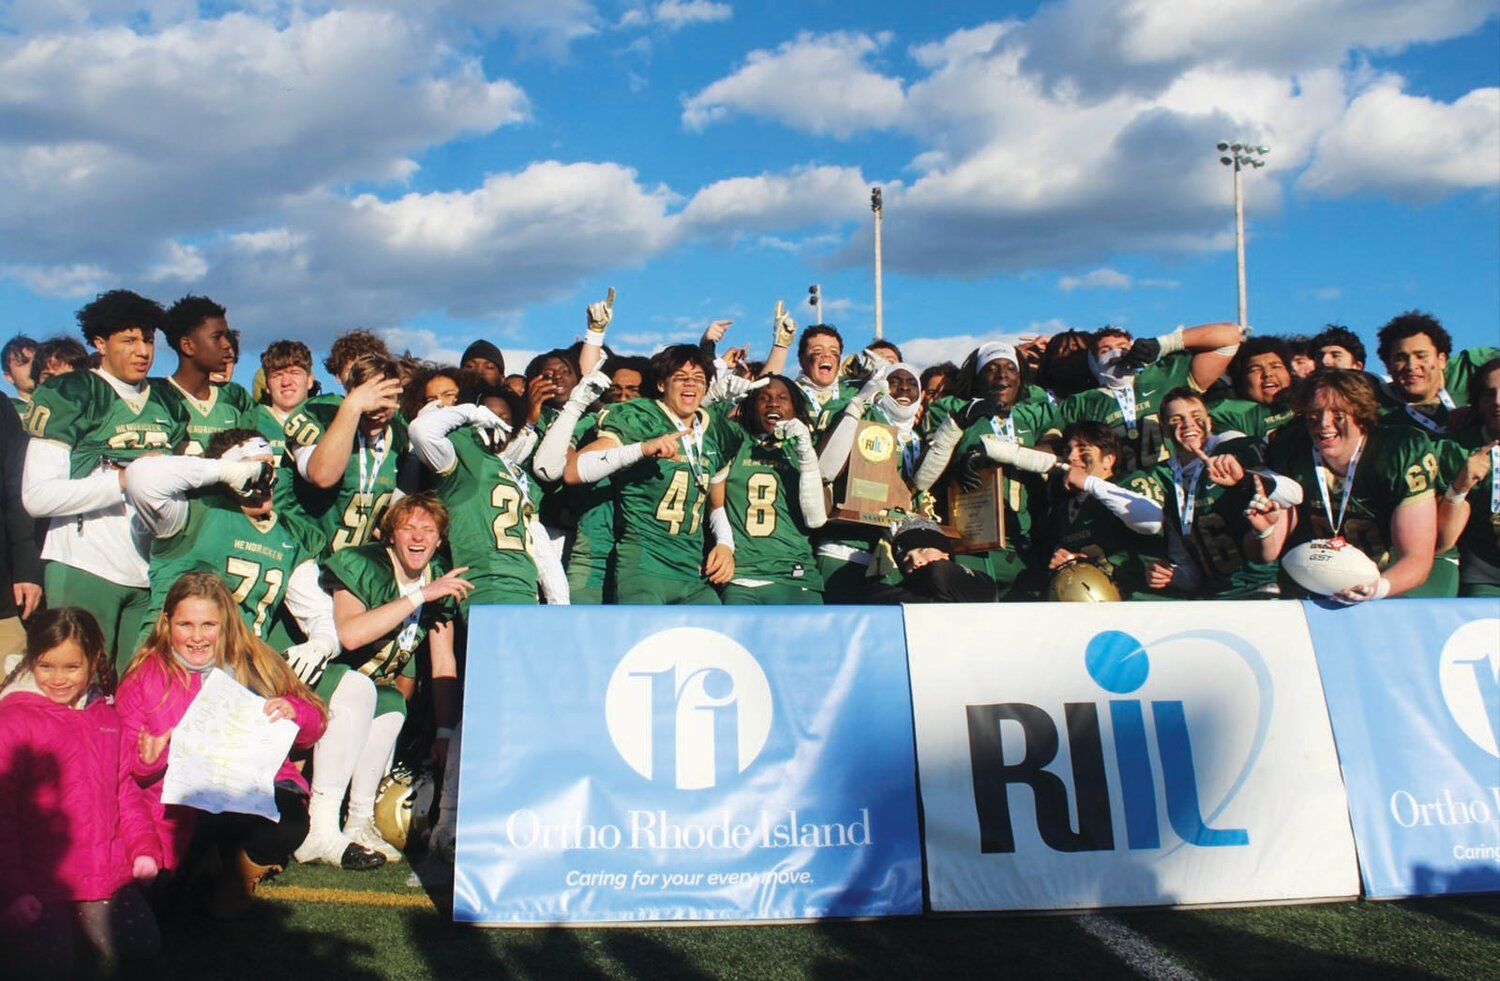 STATE CHAMPS: The Hendricken football team after winning the Super Bowl.